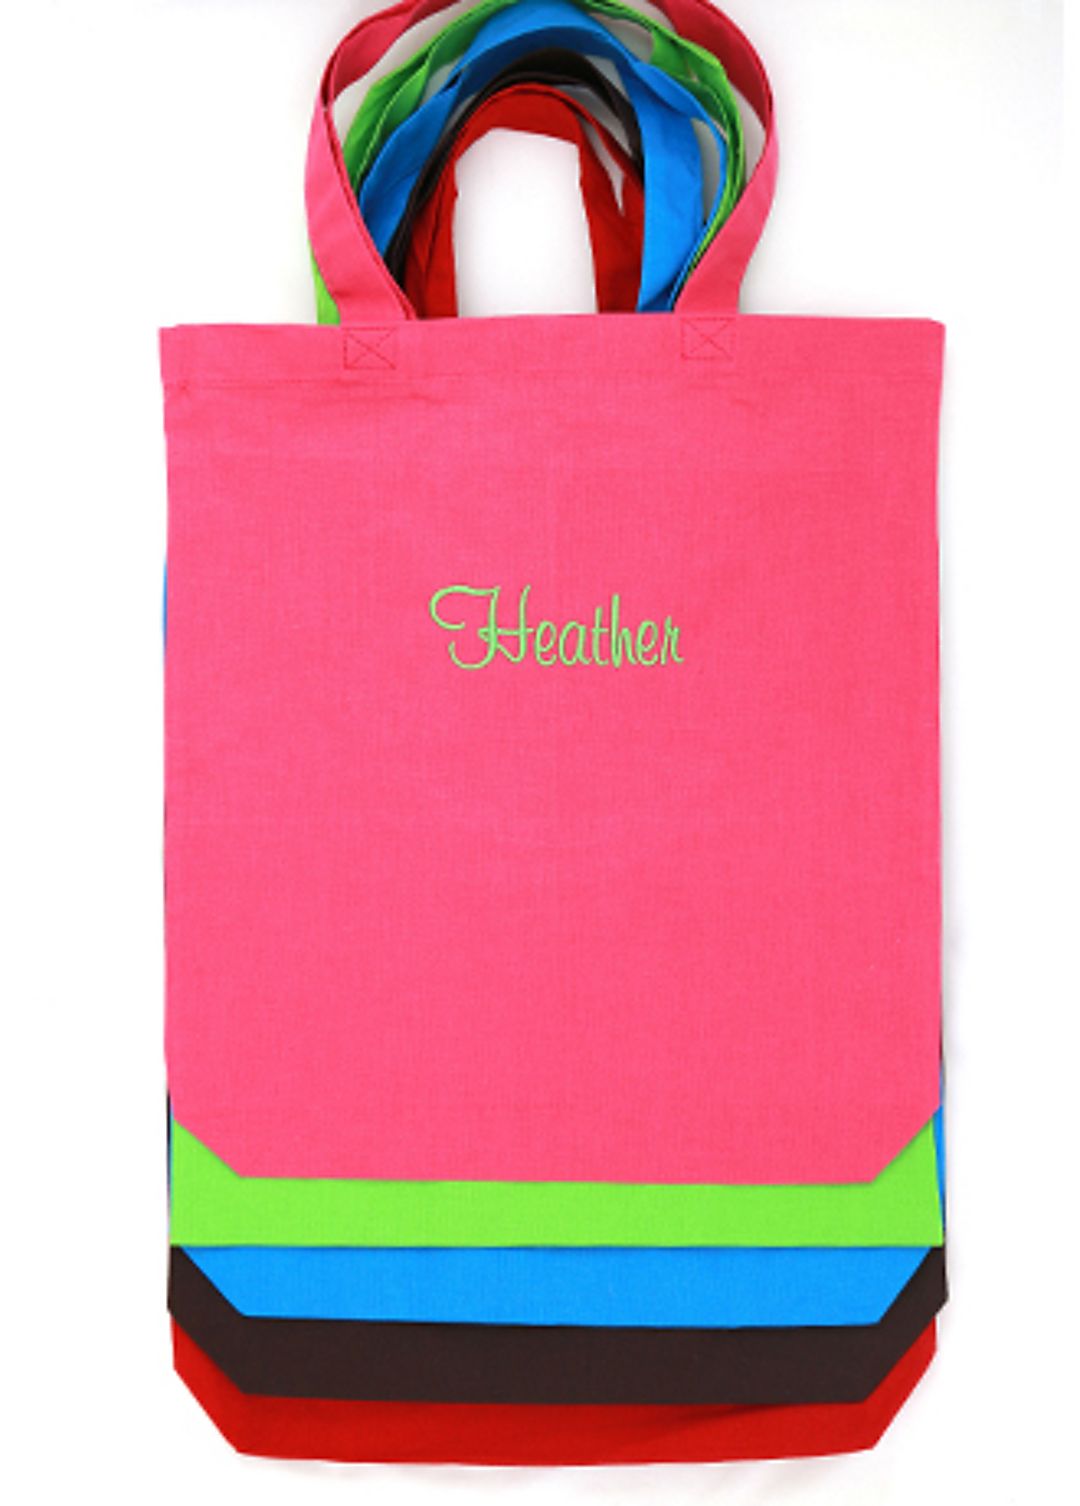 DB Exc Personalized All-Purpose Cotton Tote Image 3